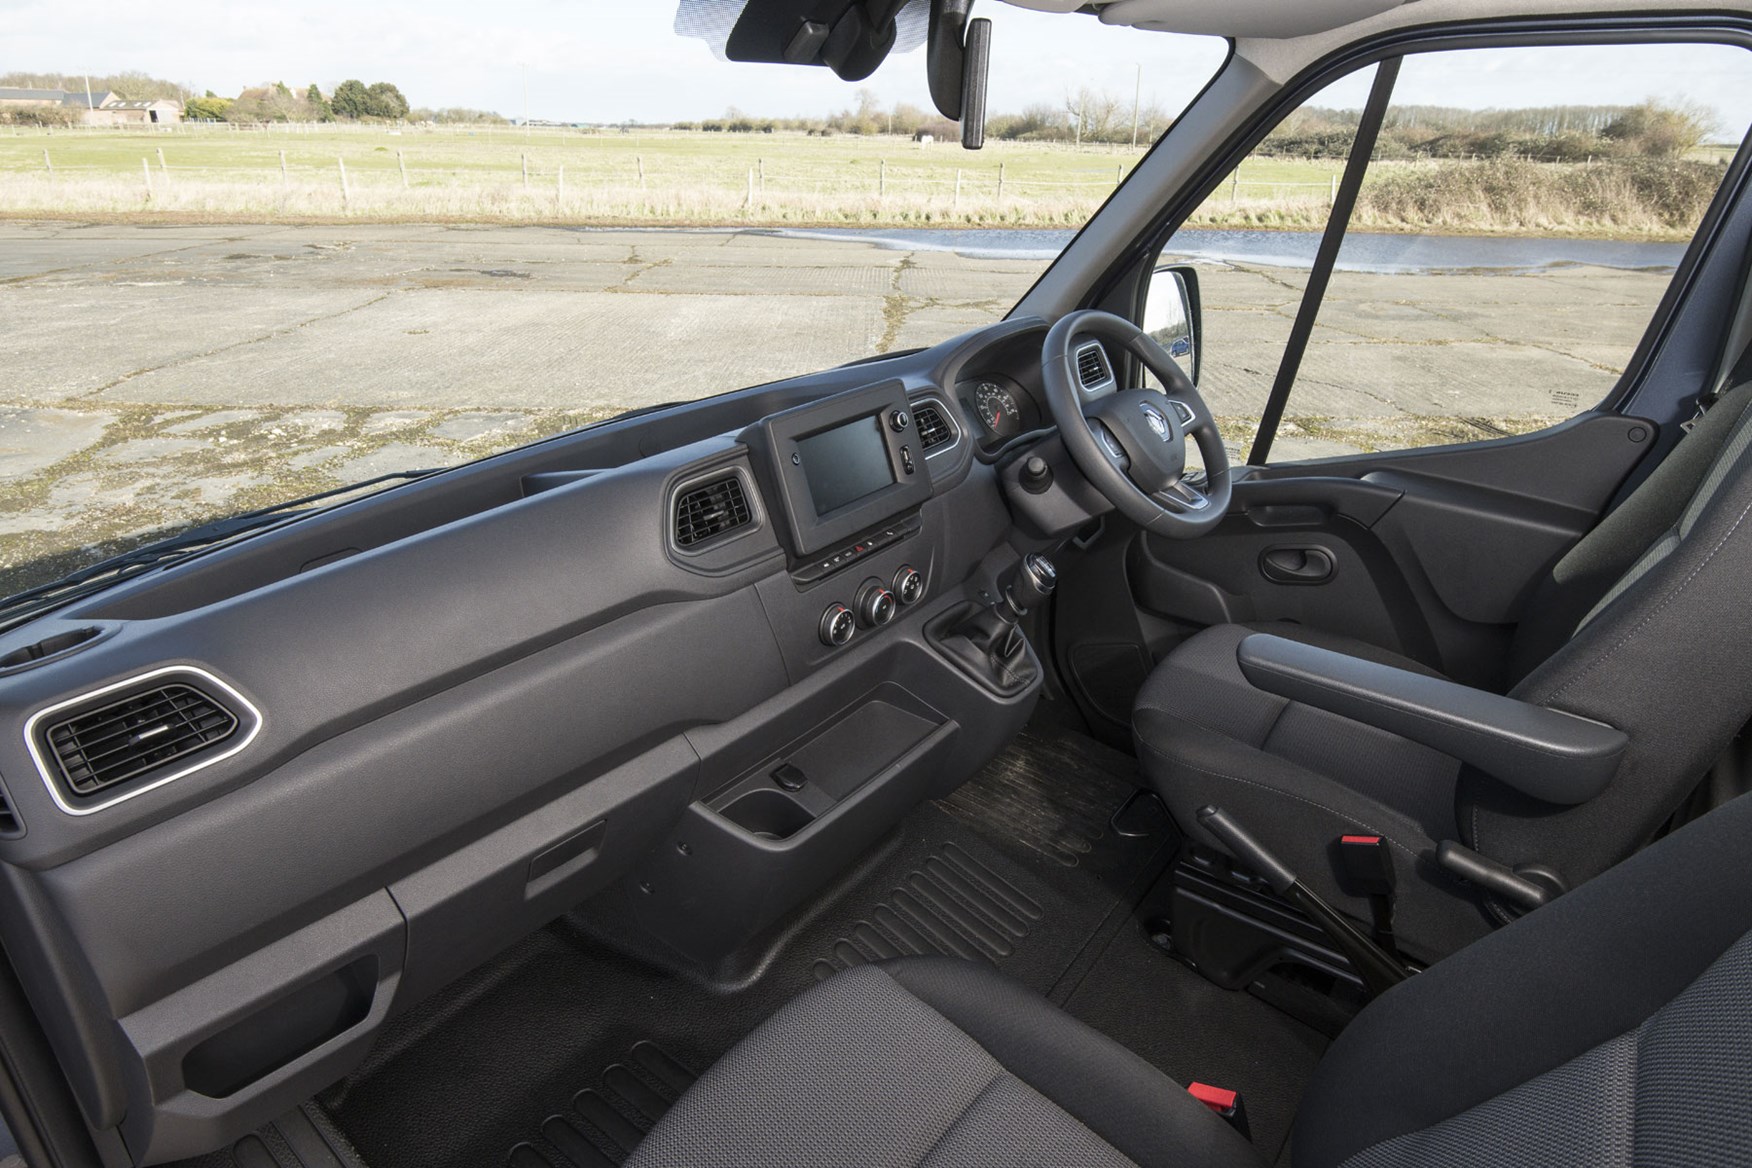 Renault Master review, updated 2019 interior, right-hand drive